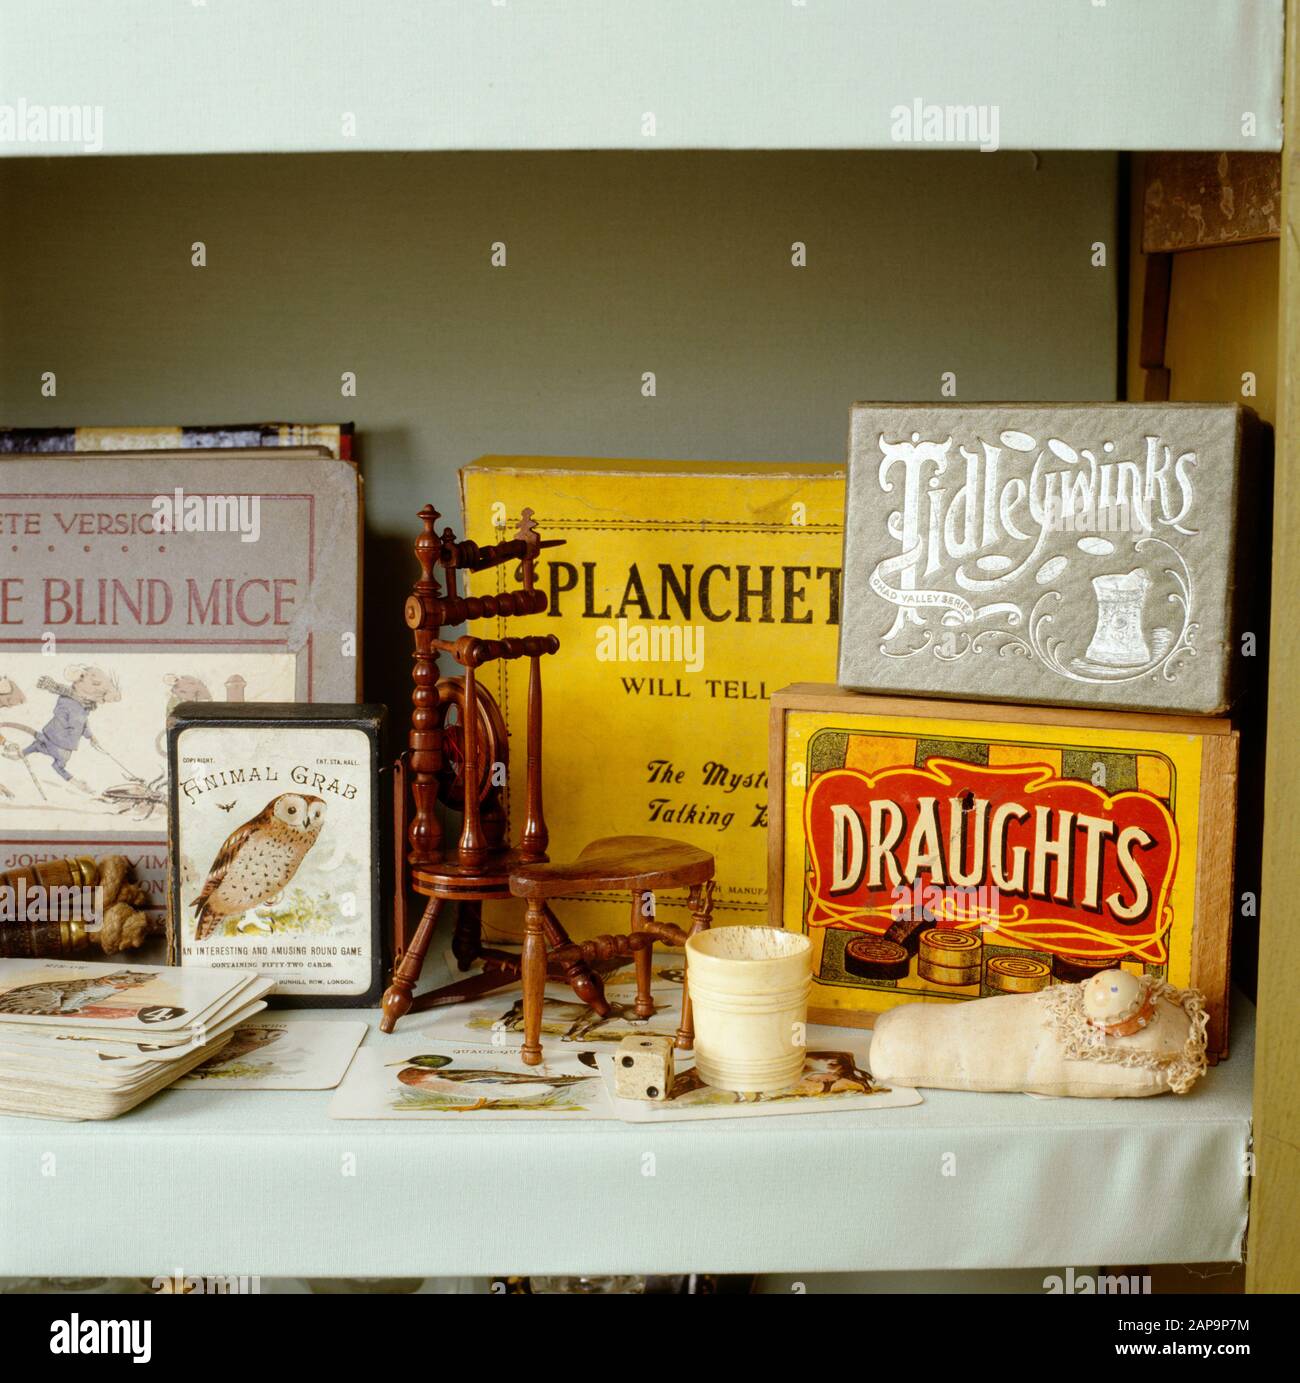 Detail of the P.M.Ward Collection of toys & games in a display cabinet includes Draughts, Tidleywinks, Planchette, playing cards, a miniature spinning Stock Photo